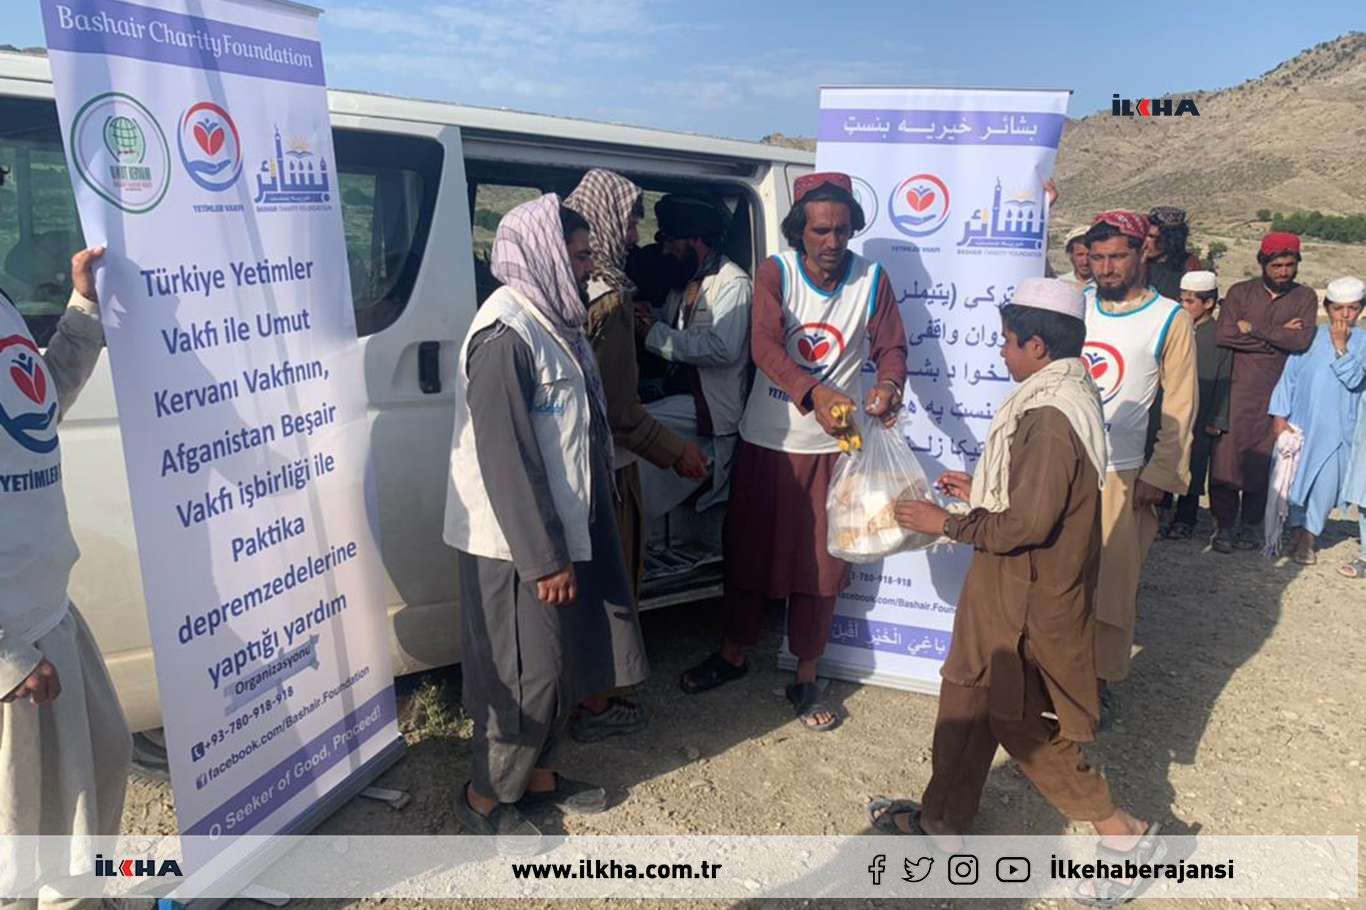 Orphans Foundation, Hope Caravan continue offering humanitarian aid in Afghanistan